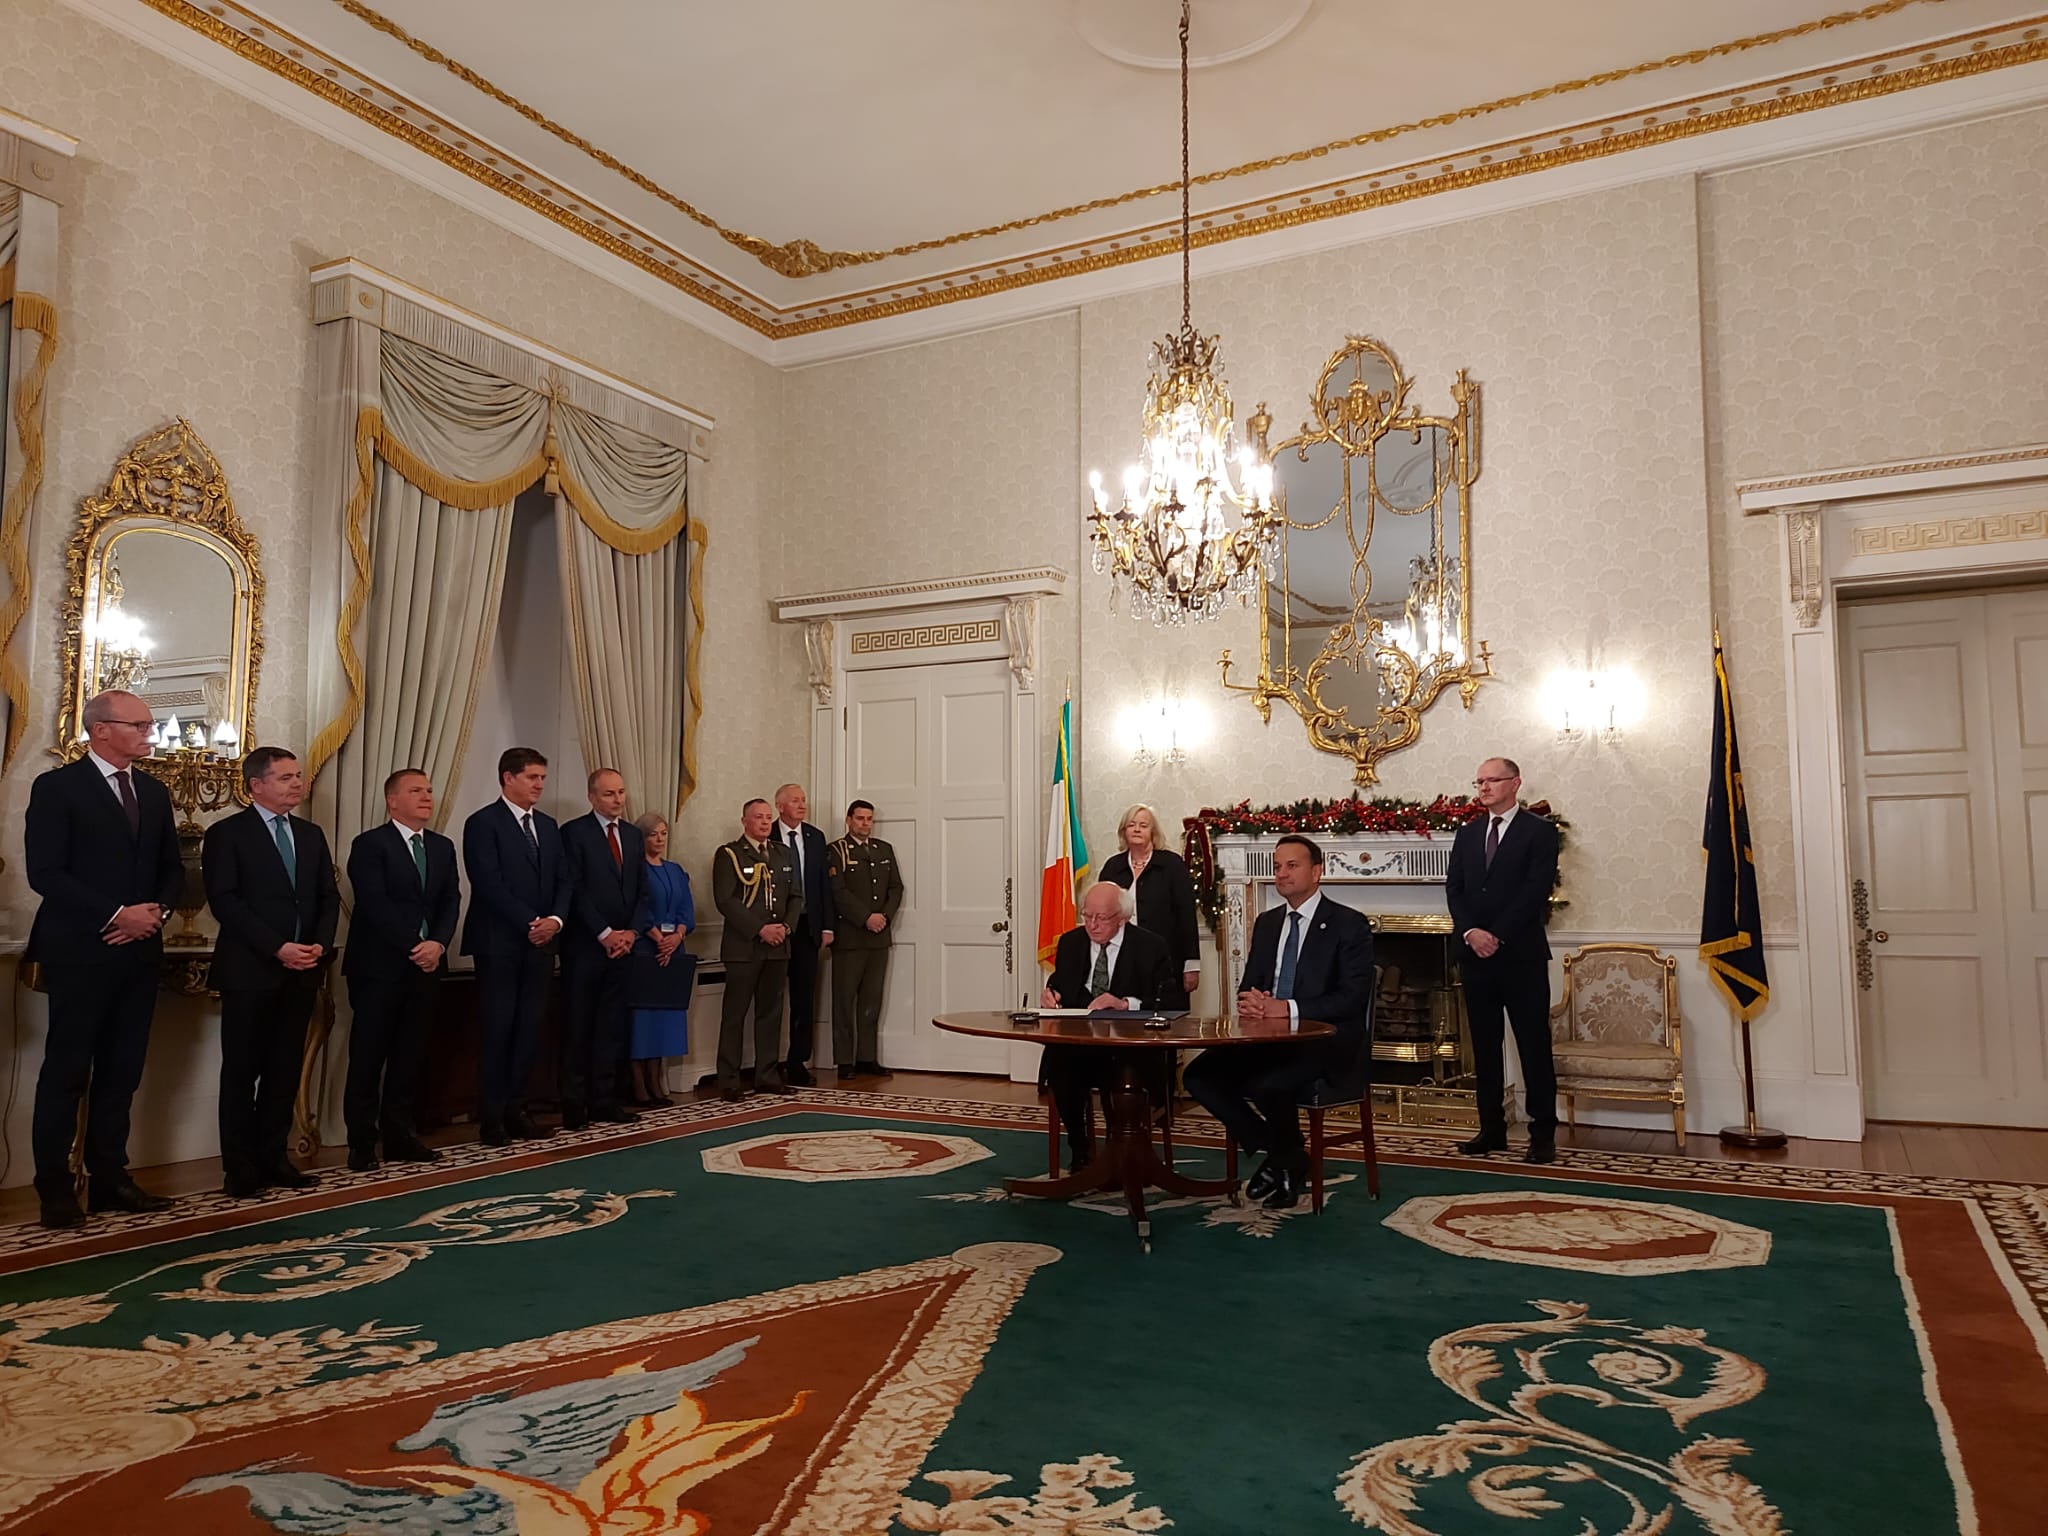 President Michael D Higgins (seated left) and Taoiseach Leo Varadkar (seated right) prepare to hand out seals of office to the Cabinet (standing left) at Áras an Uachtaráin